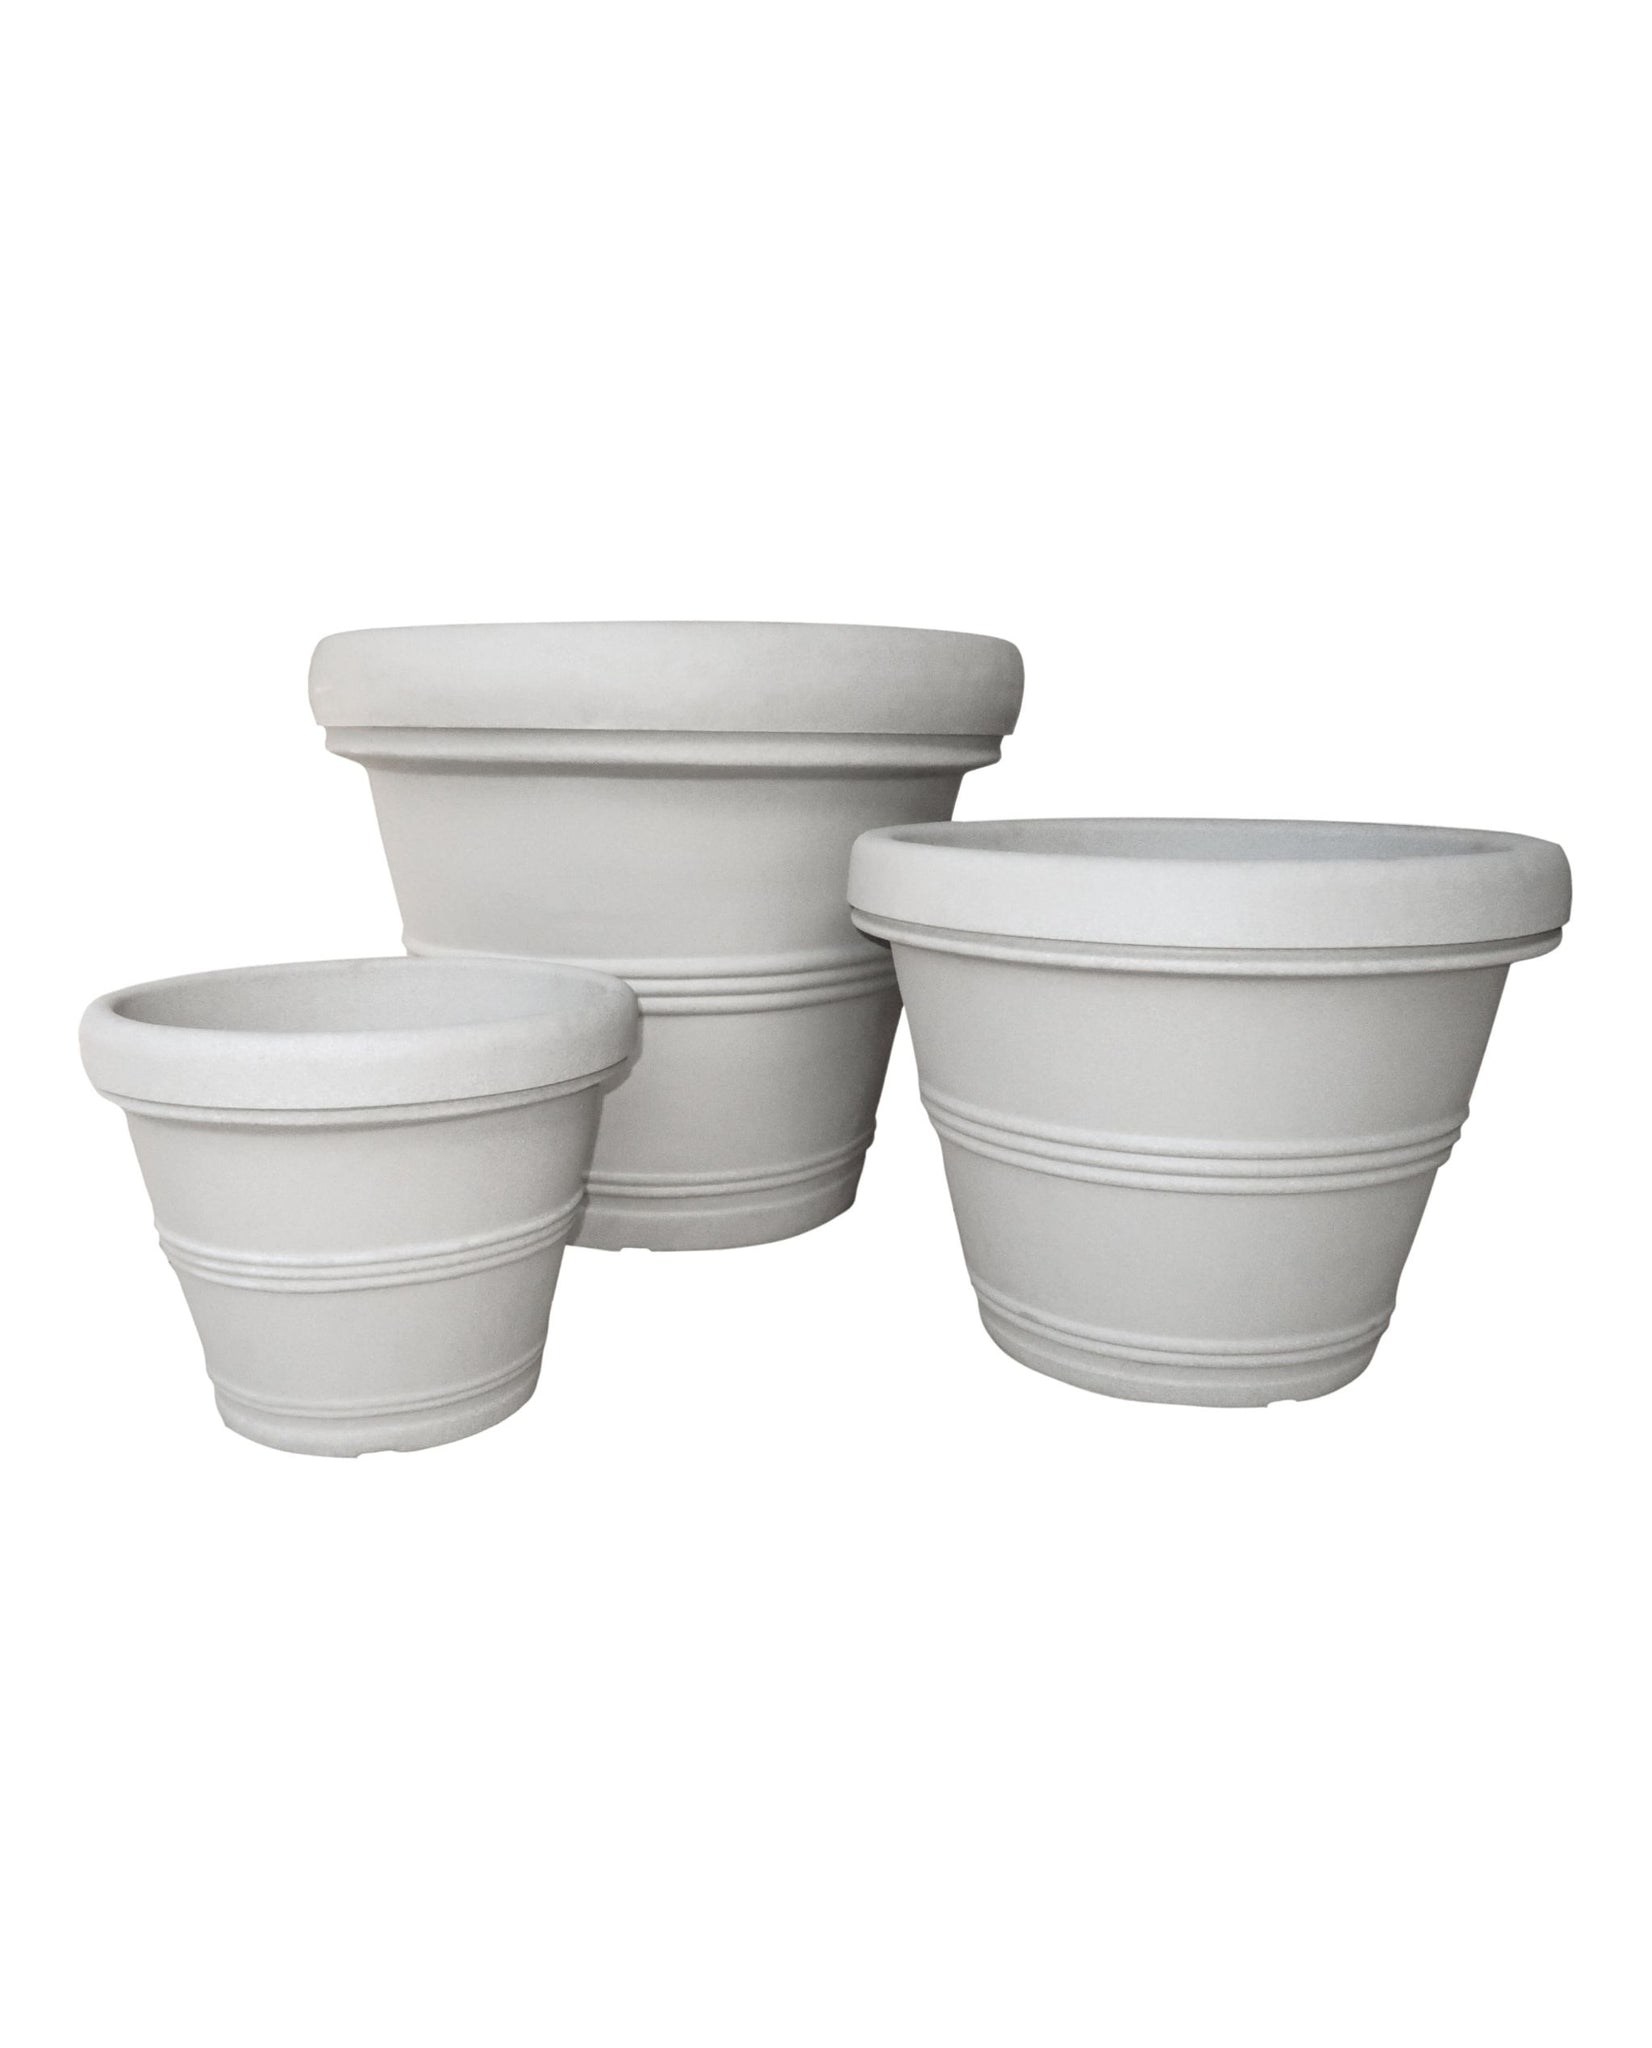 n architectural planter that makes a statement. The beautiful extra large Round Basic Rim Japi Planter in the colour sandstone. Exquisite as a stand alone planter or in a group display.  Great variable sizes.